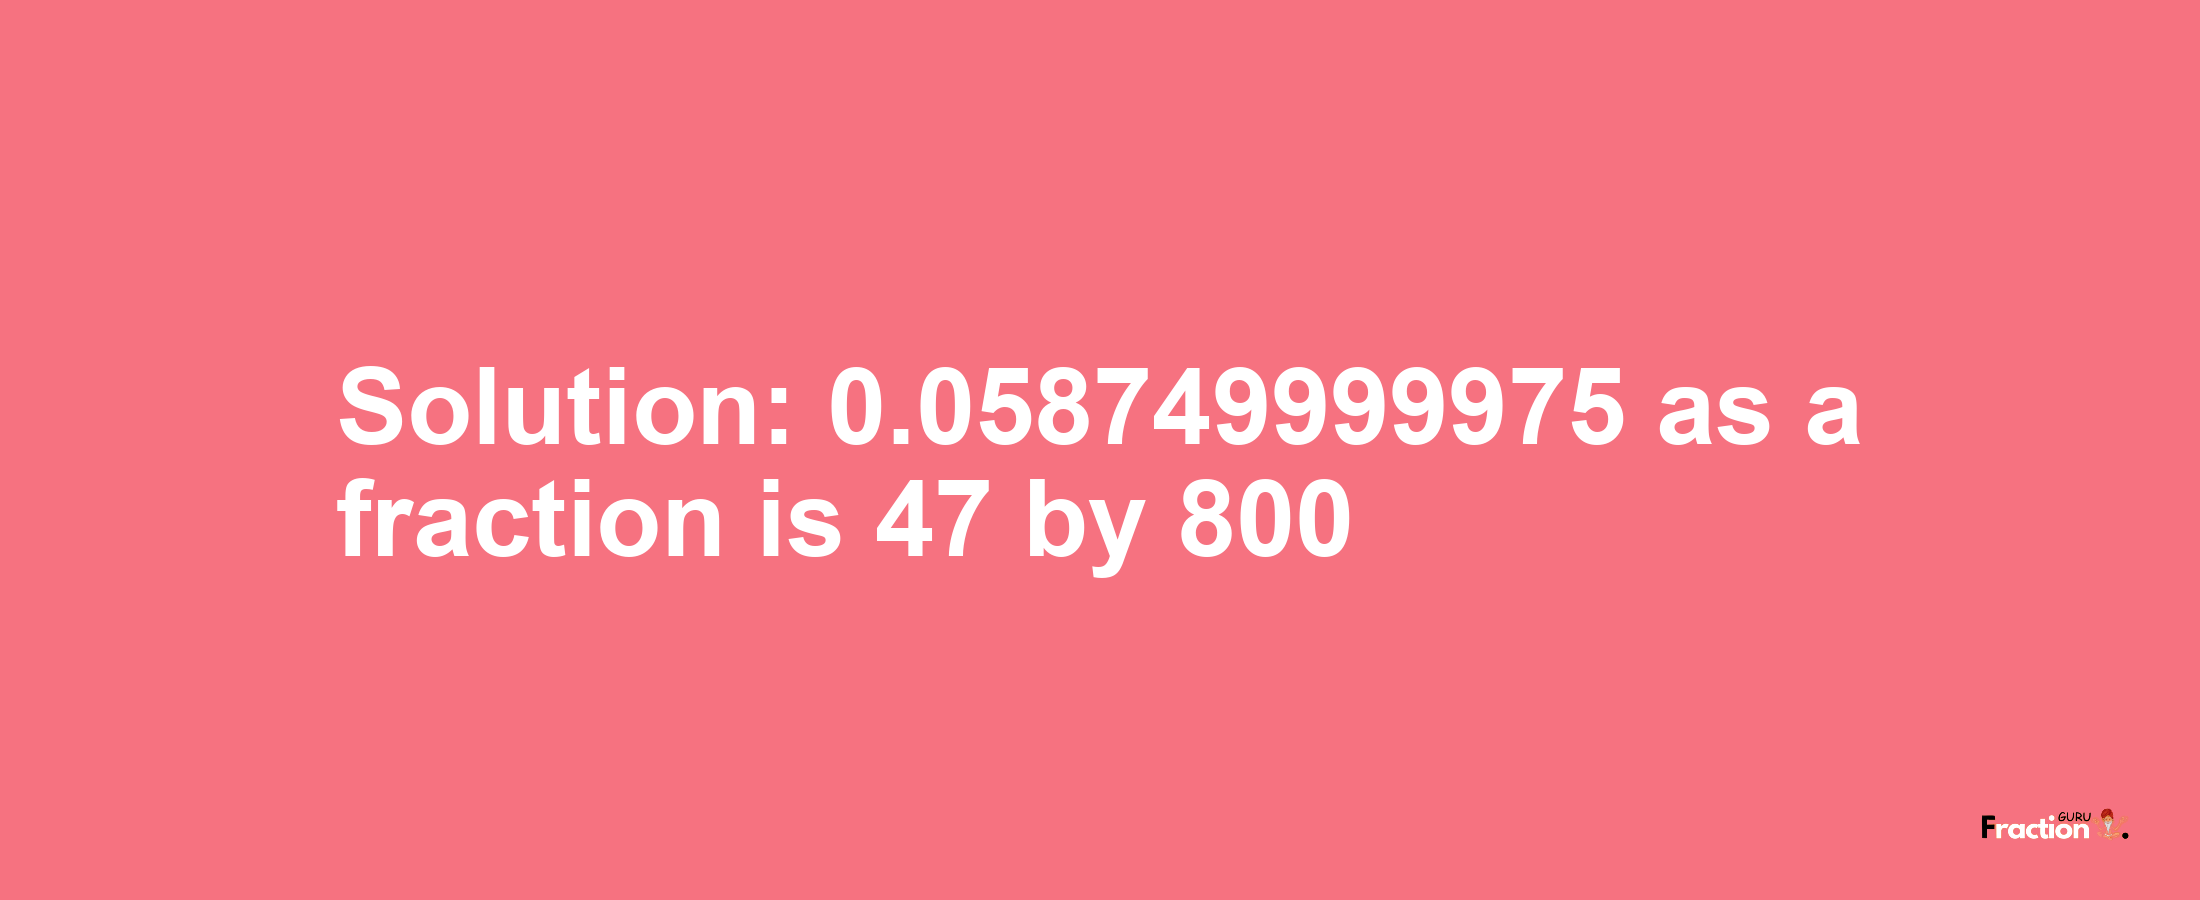 Solution:0.058749999975 as a fraction is 47/800